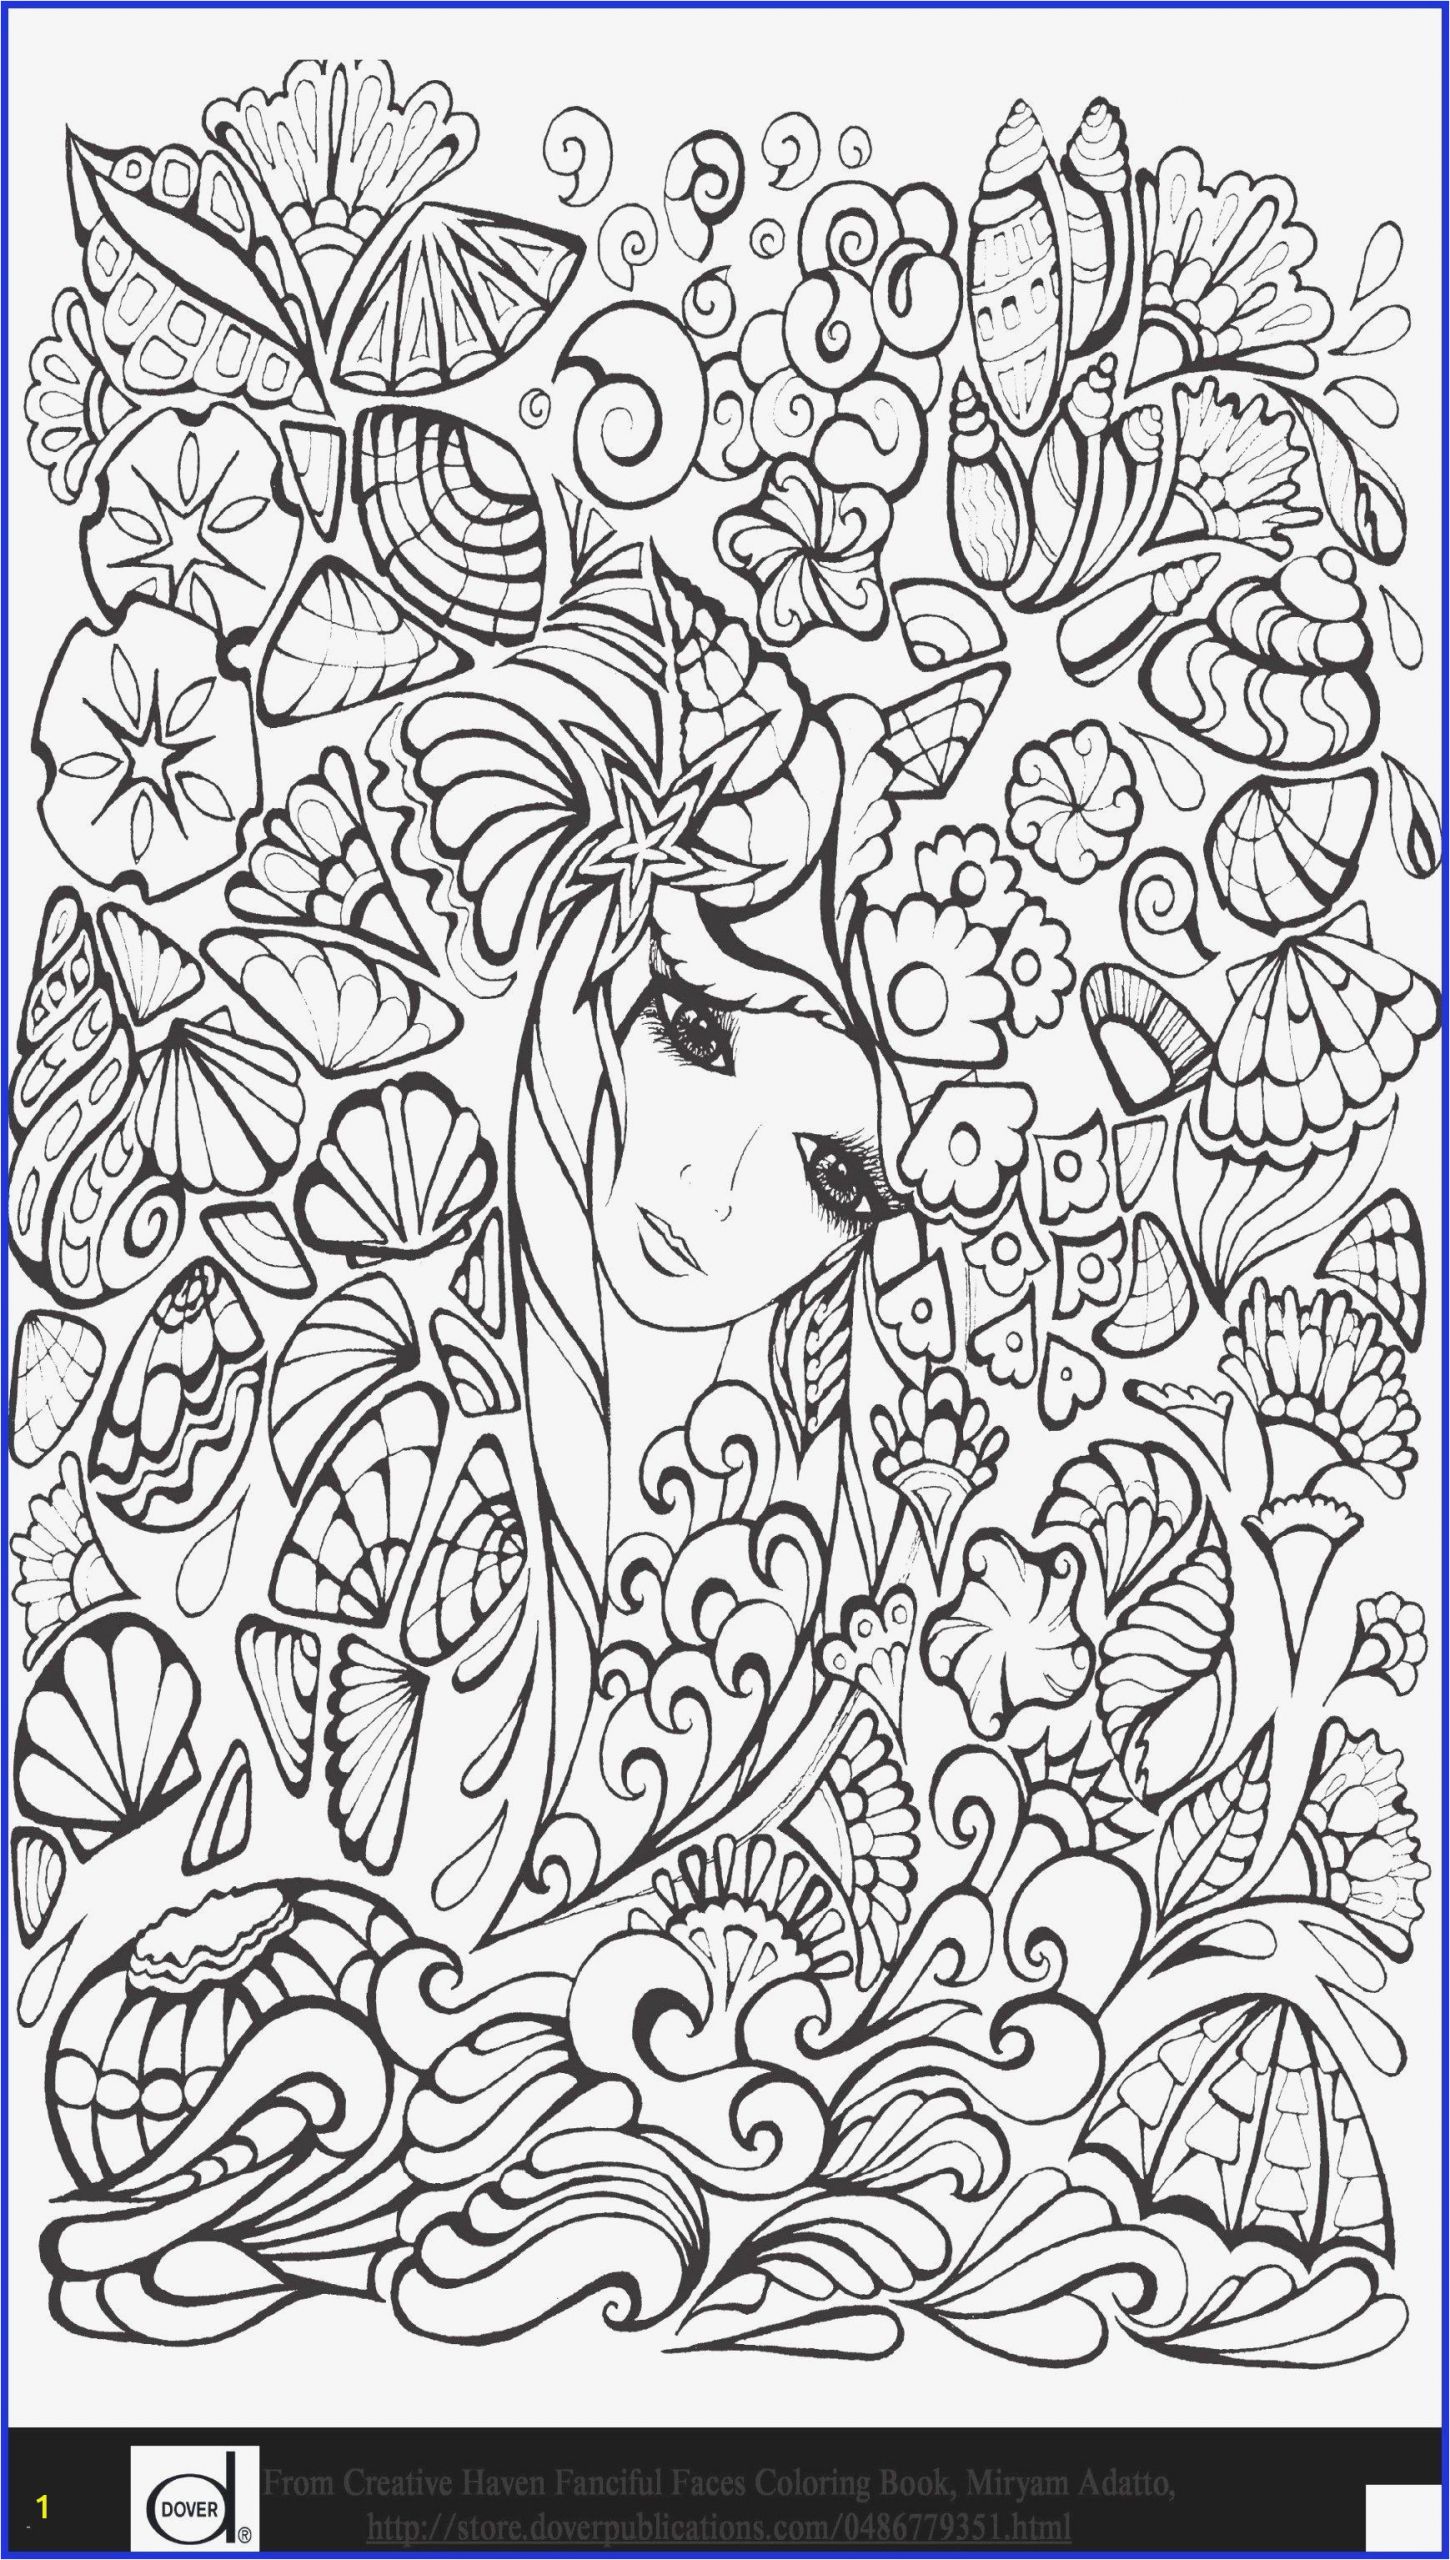 Disney Coloring Pages for Adults Coloring for Adults Design In 2020